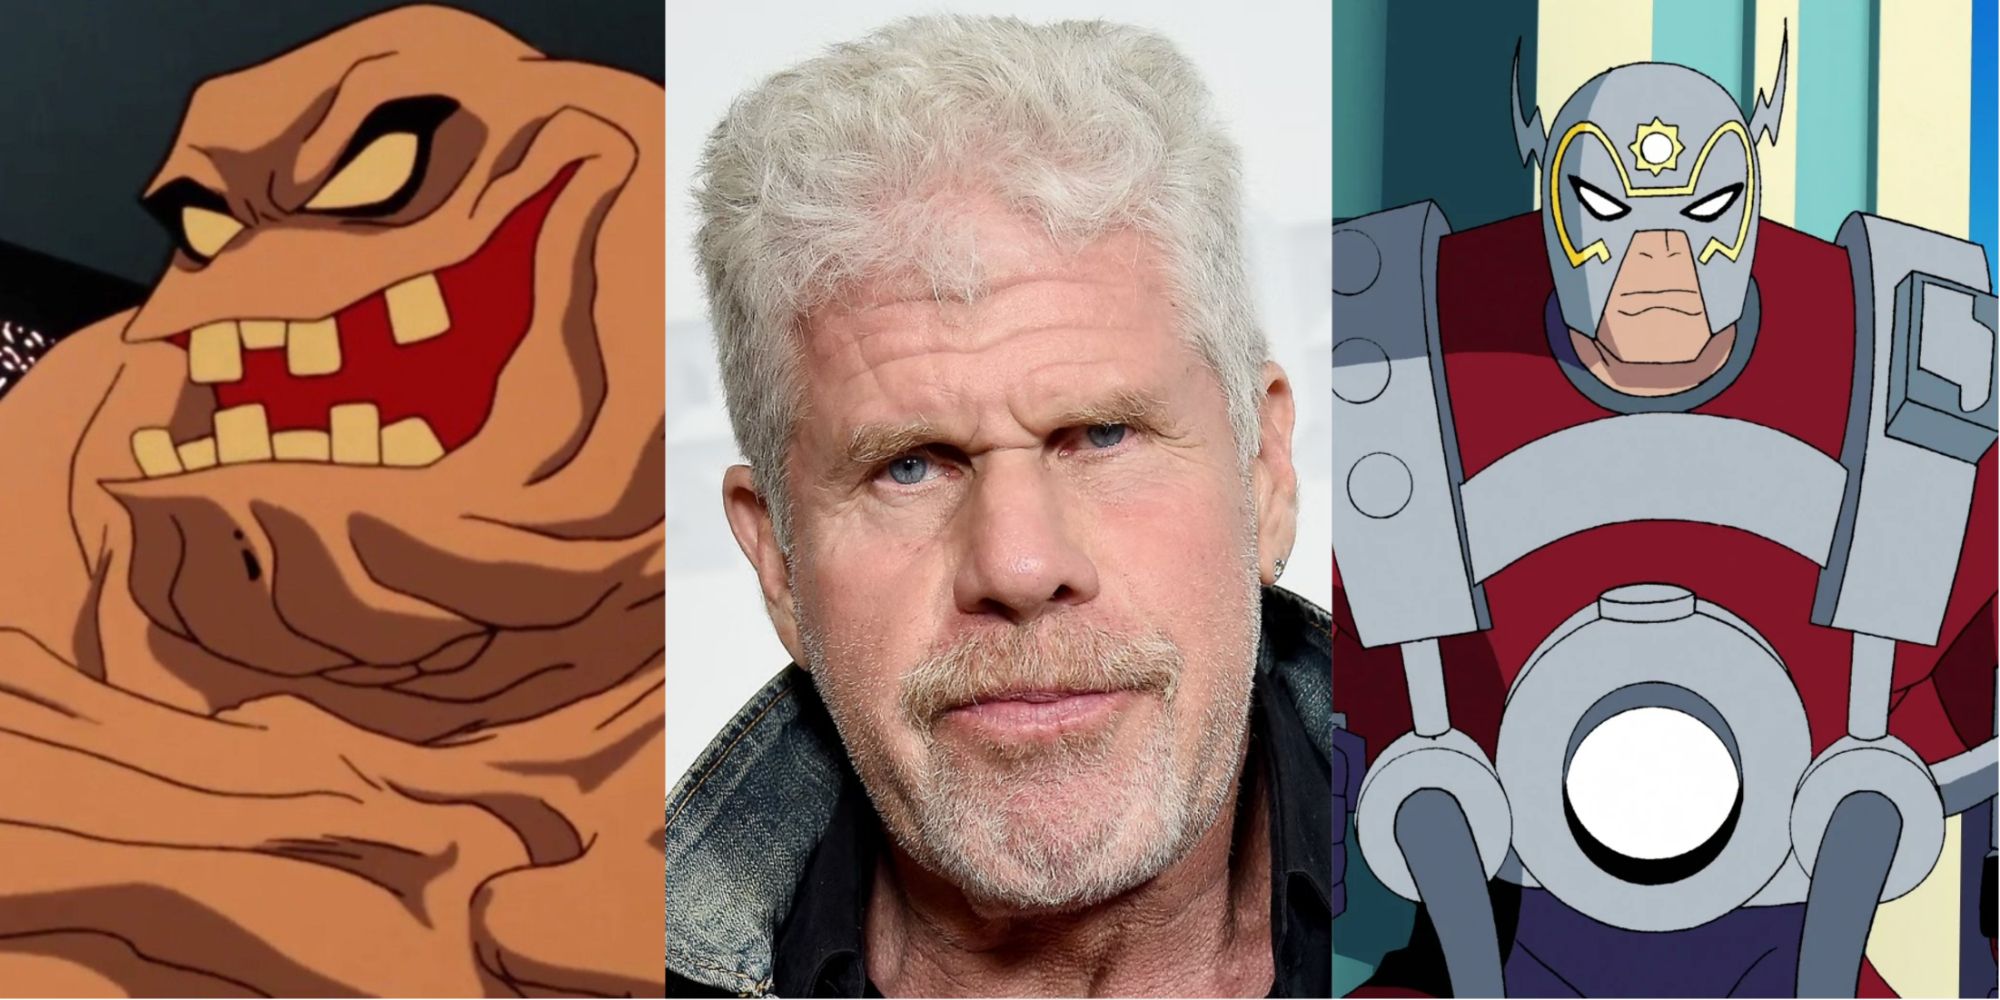 Split image of Ron Perlman Clayface and Orion